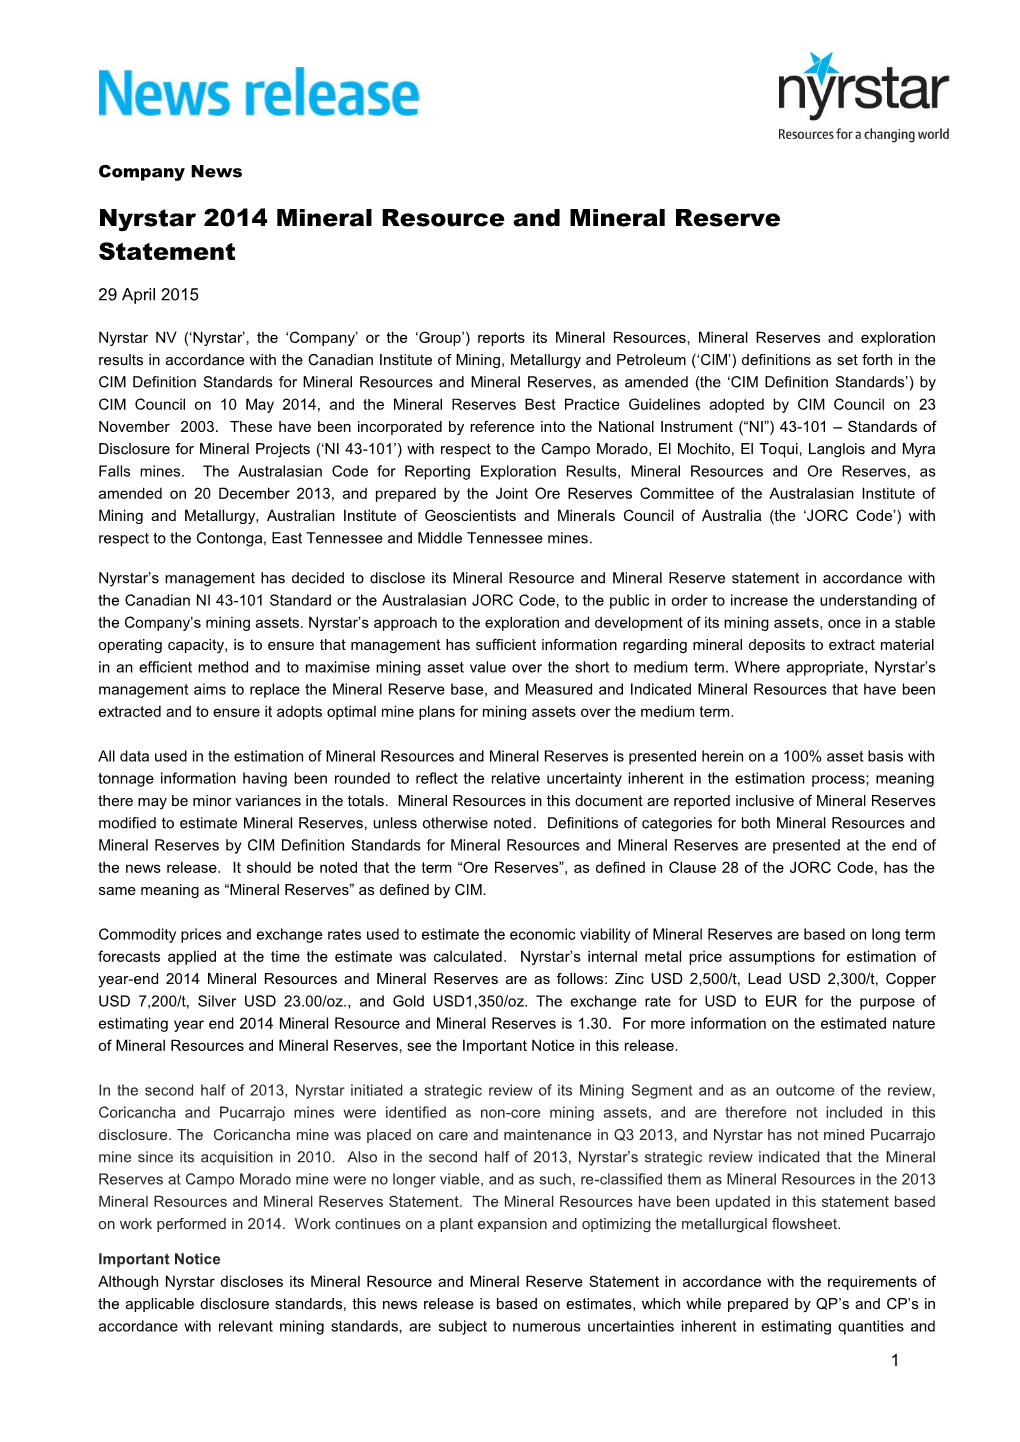 2014 Mineral Resource and Reserve Statement